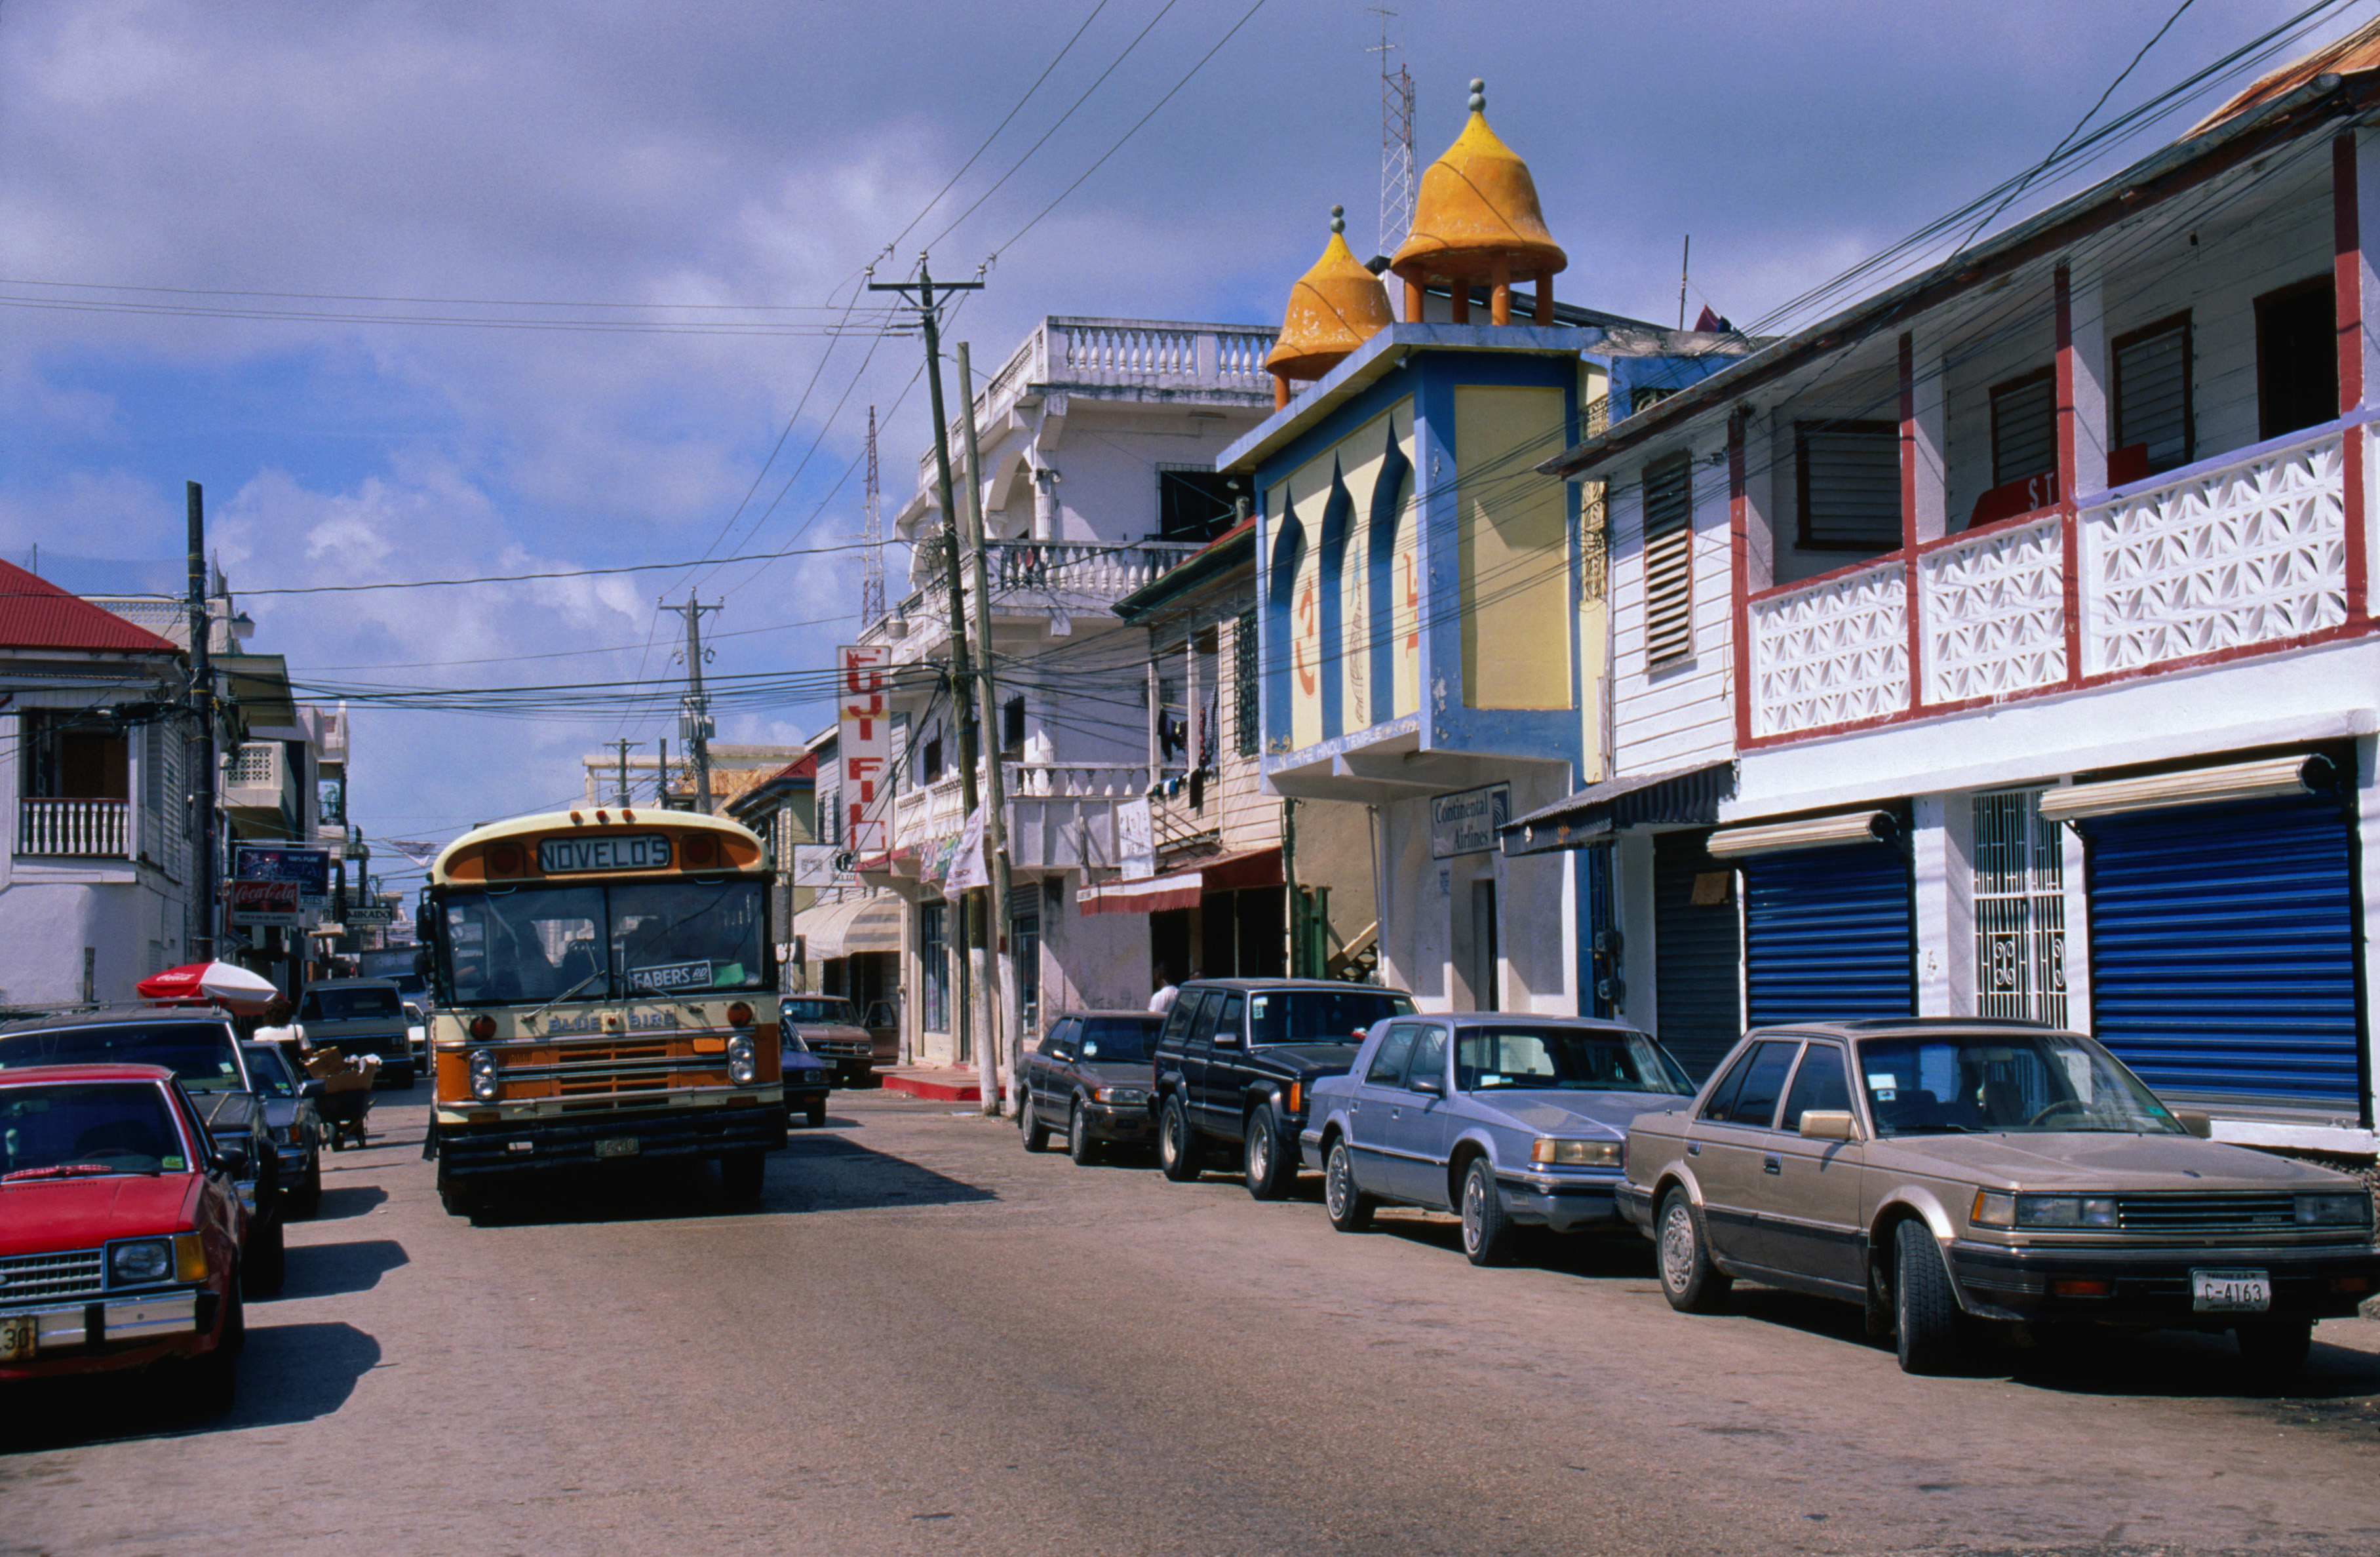 Street view with vehicles parked and a bus in motion, traditional buildings with decorative elements on facades, and a dome structure